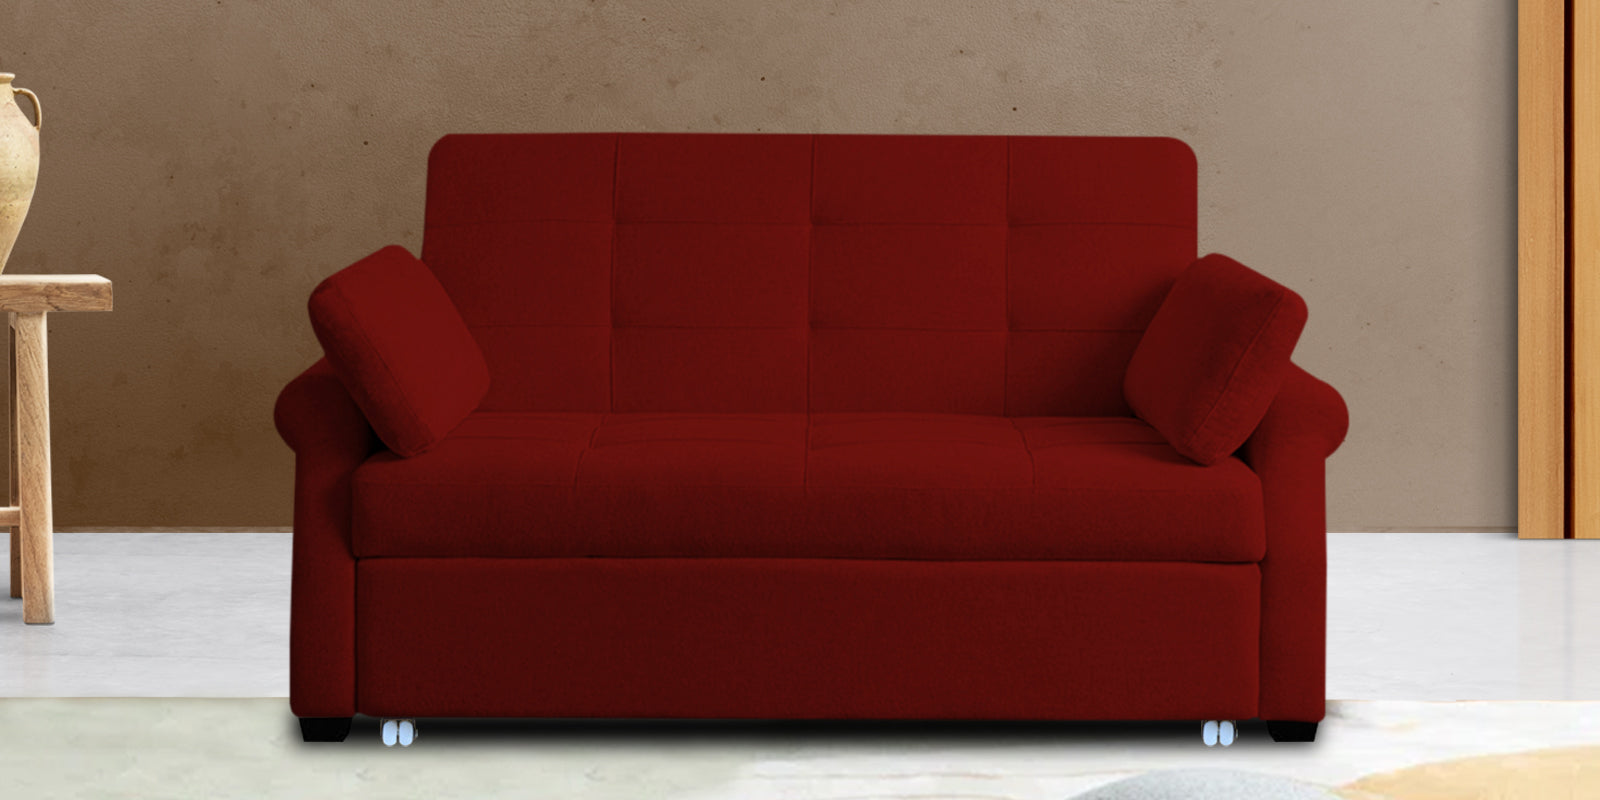 Flornia Fabric 3 Seater Pull Out Sofa Cum Bed In Blood Maroon Colour